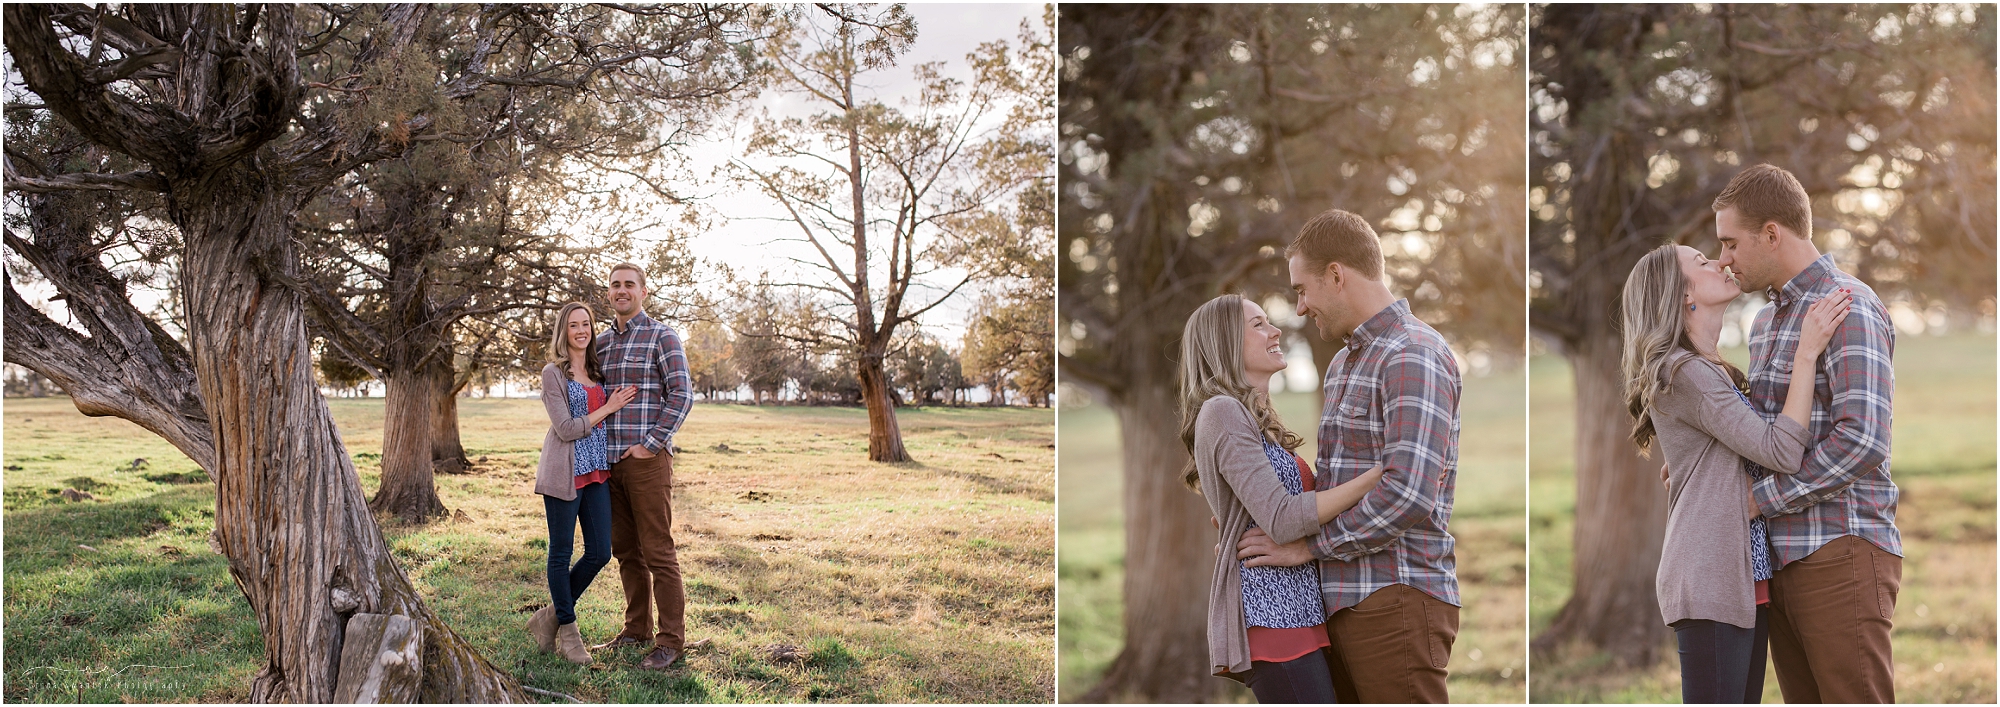 Gorgeous winter light peeking through the juniper trees of this Central Oregon outdoor engagement photography session. 